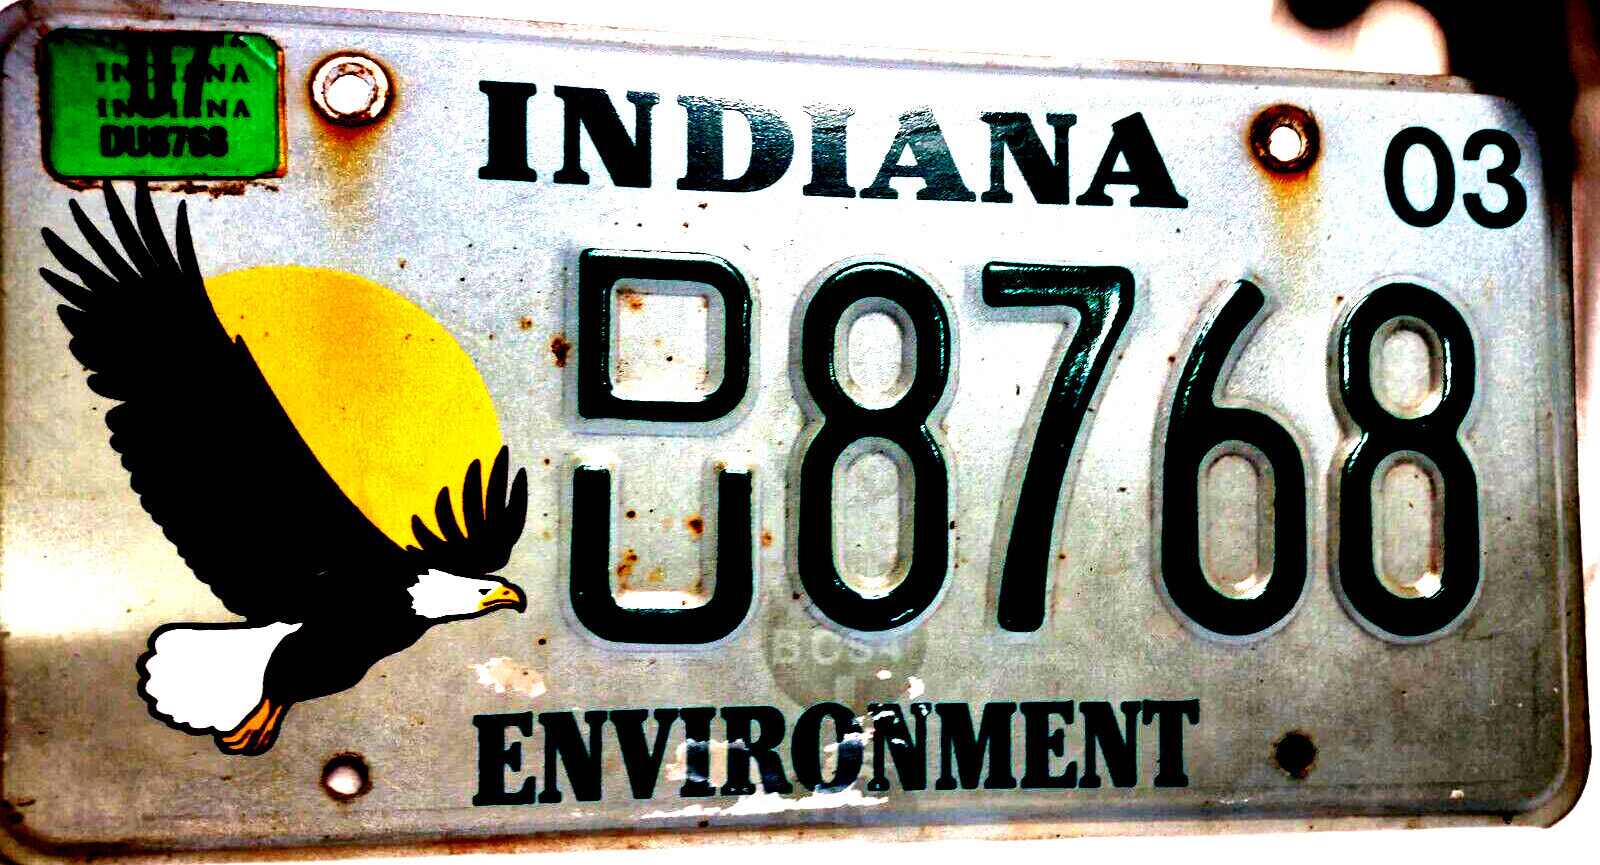 Indiana 2007 Bald Eagle Metal Expired License Plate DU8768 Environment